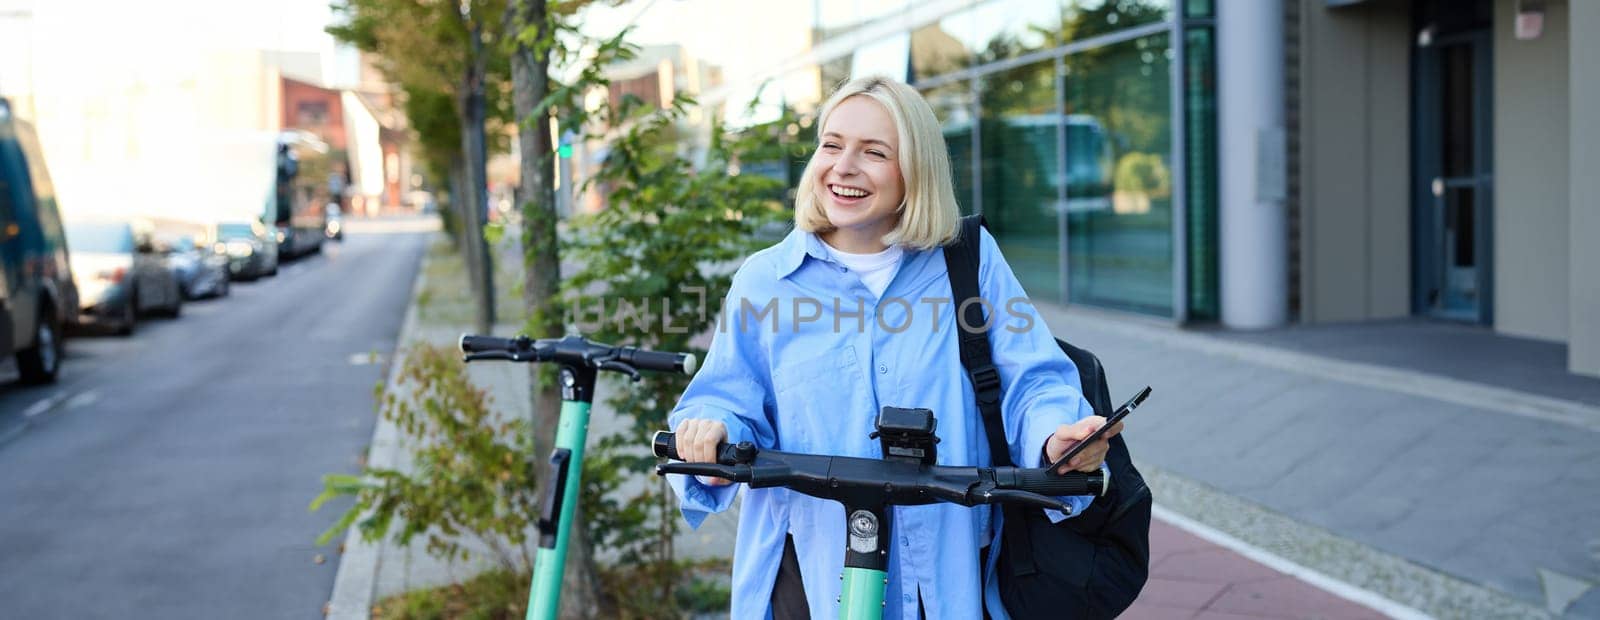 Portrait of smiling blond woman, college student using smartphone app to scan QR code on green electric scooter on street, renting a ride.